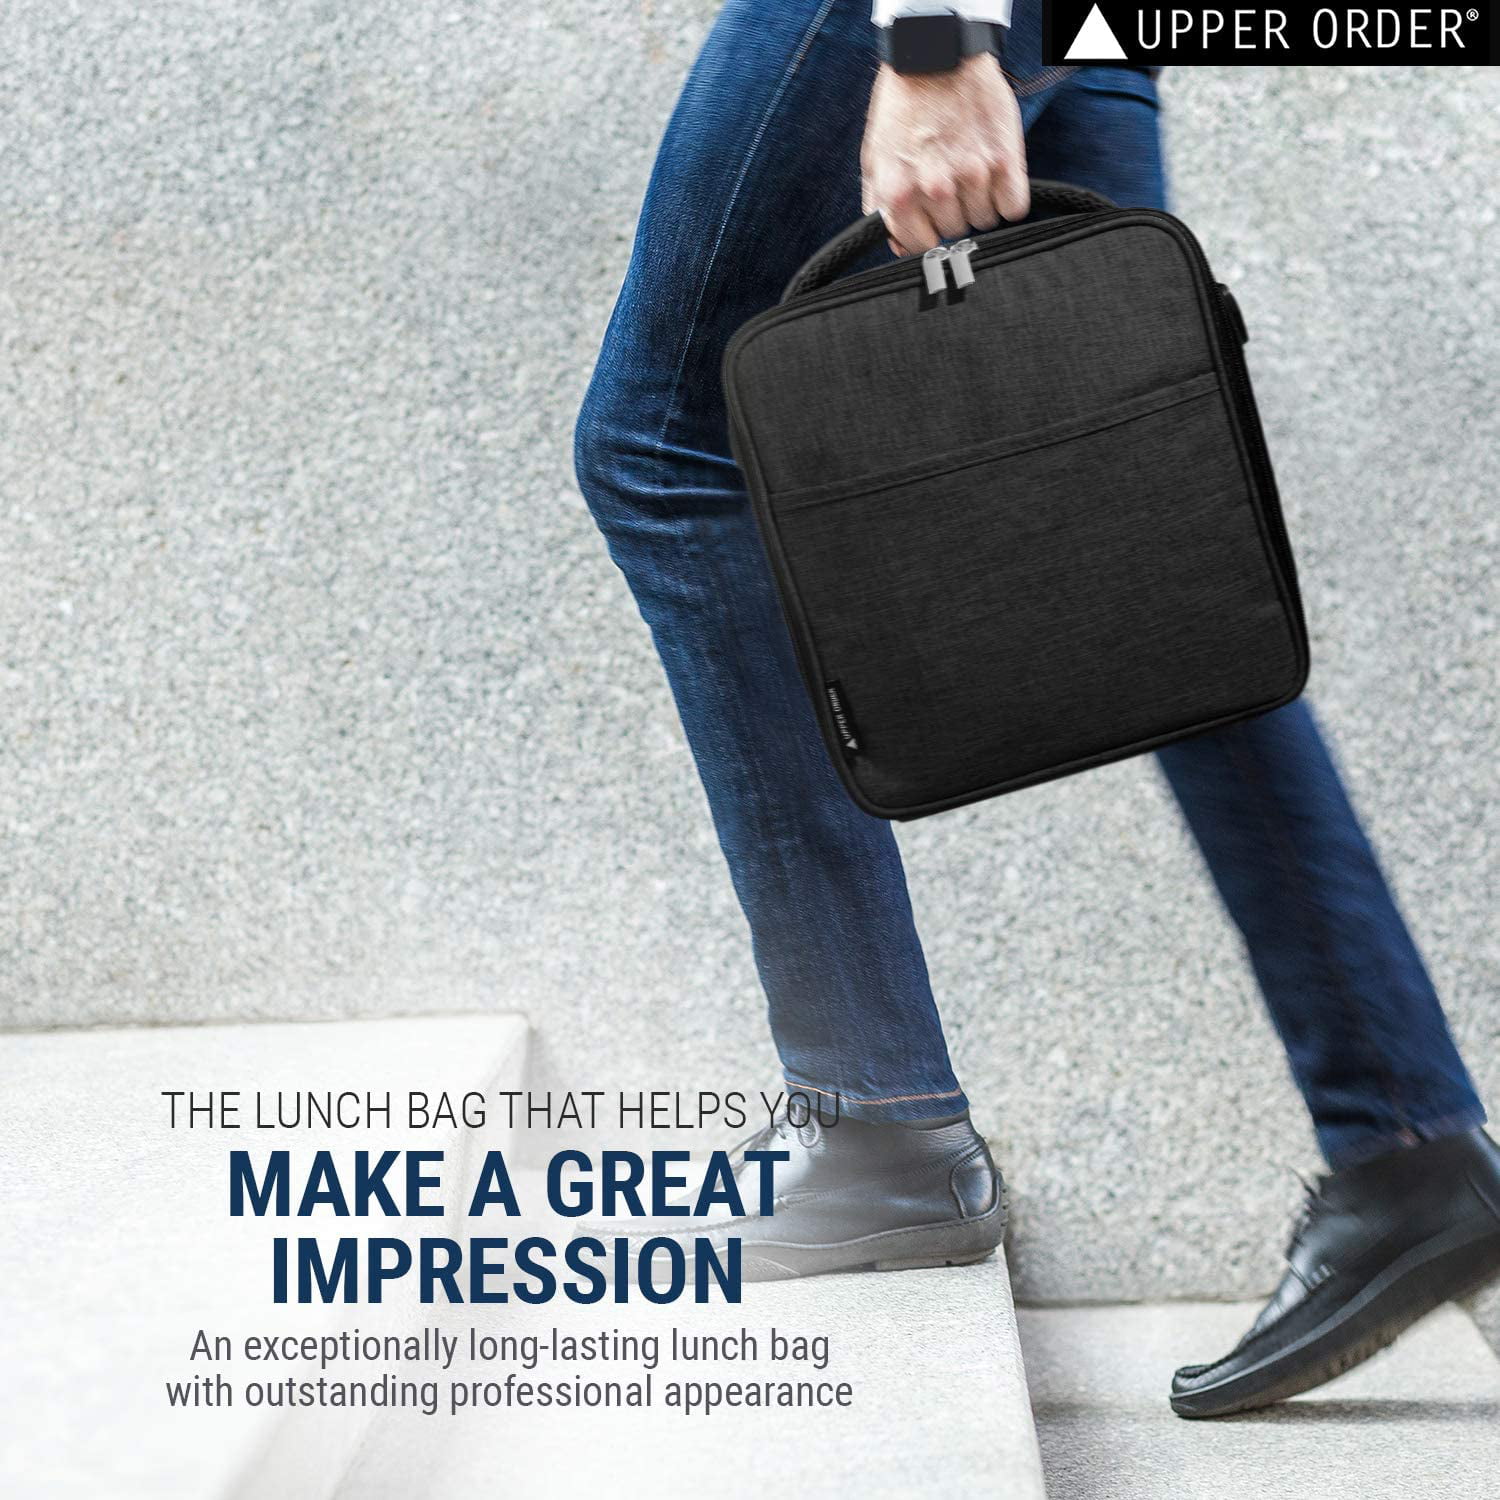 Cooler Bags (1000+ products) compare now & find price »